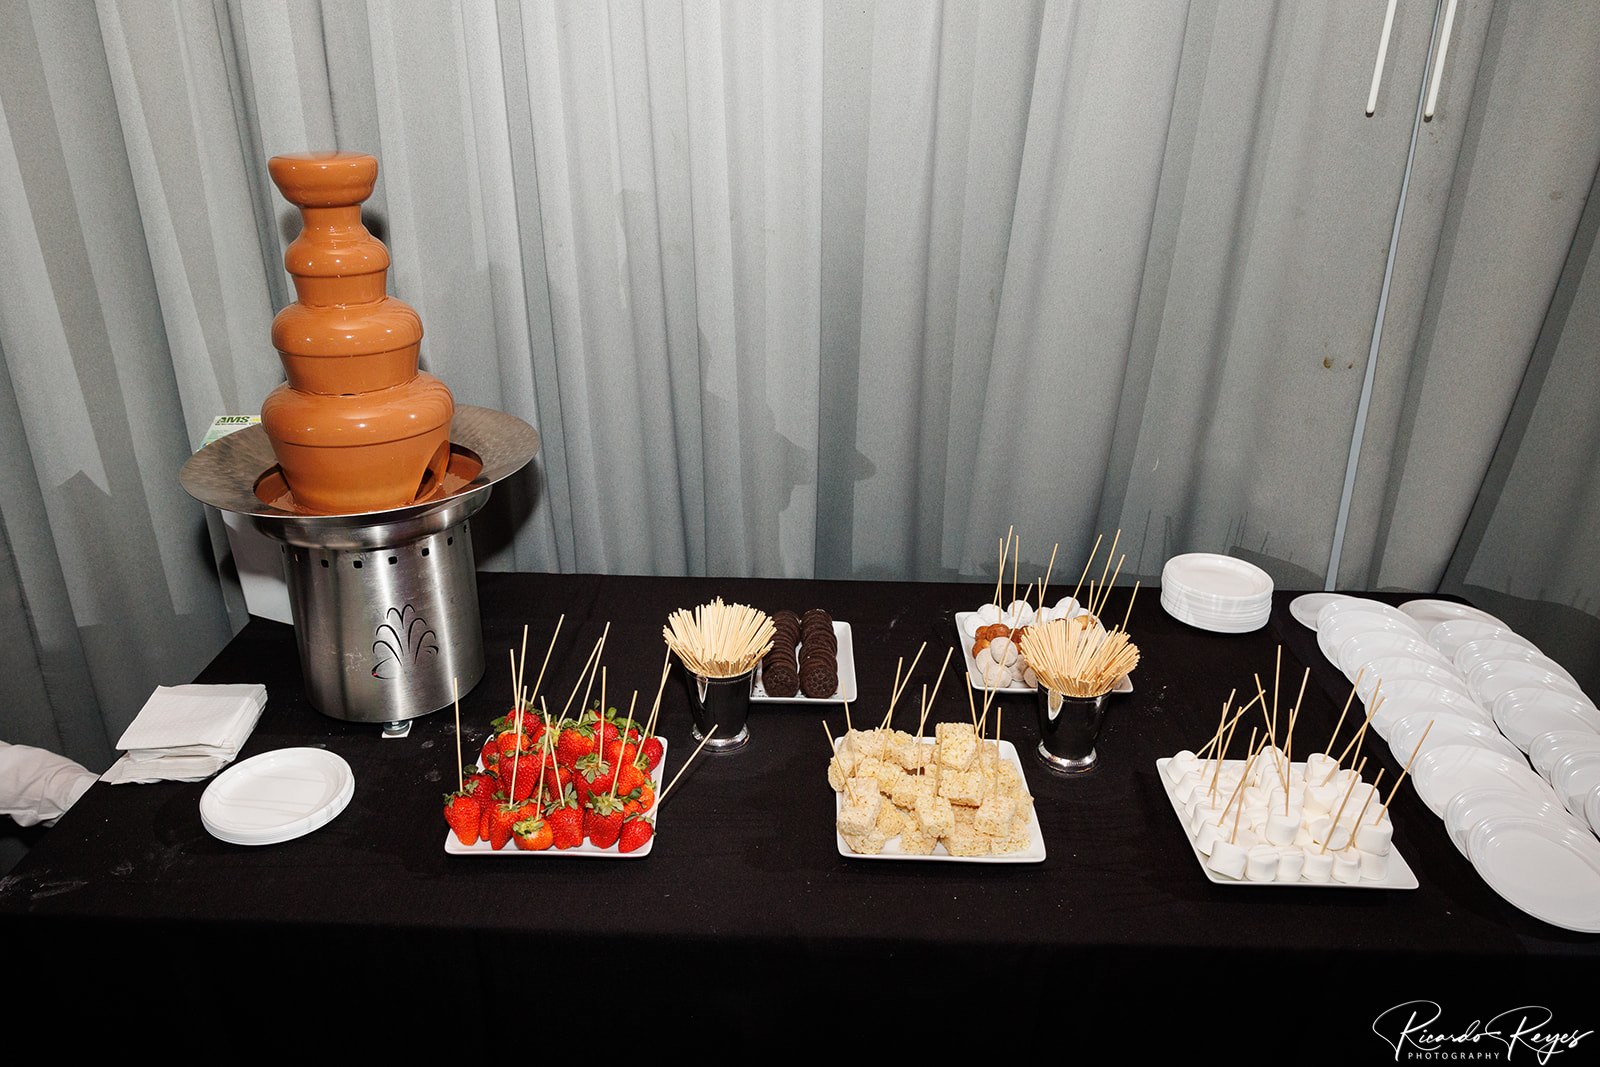 Chocolate fountain at Max's Sporty Bar Mitzvah Party at Top Golf in Germantown, MD | Pop Color Events | Adding a Pop of Color to Bar & Bat Mitzvahs in DC, MD & VA | Photo by: Ricardo Reyes Photography